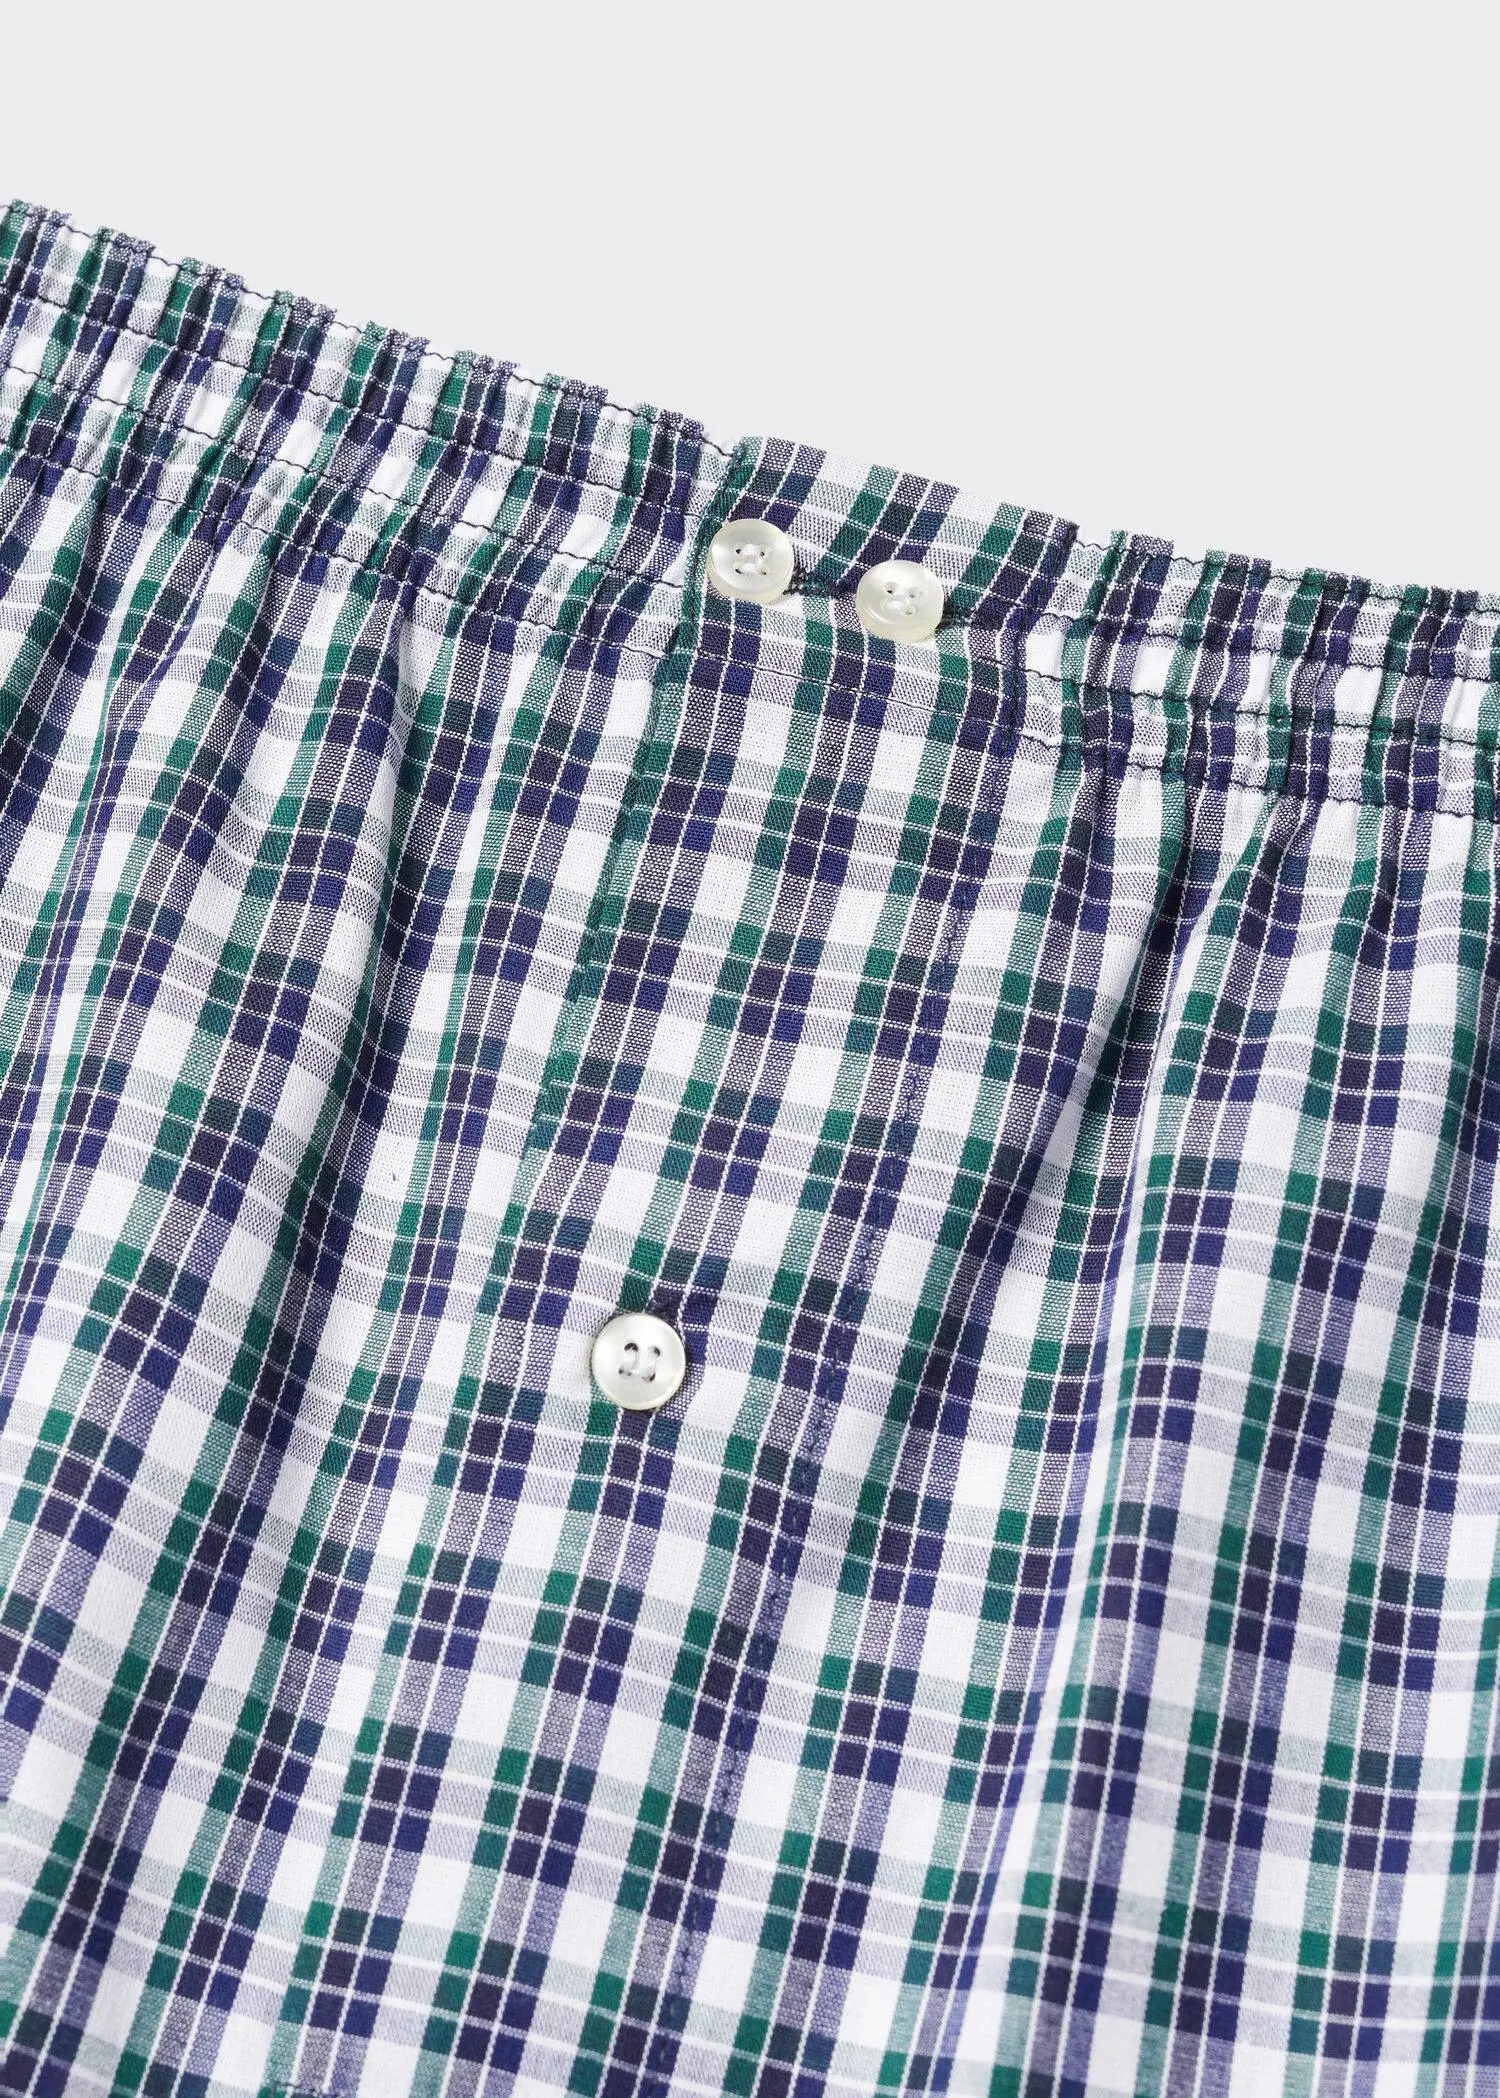 Mango Vichy check cotton briefs. a close-up view of the buttons on a pair of boxers. 